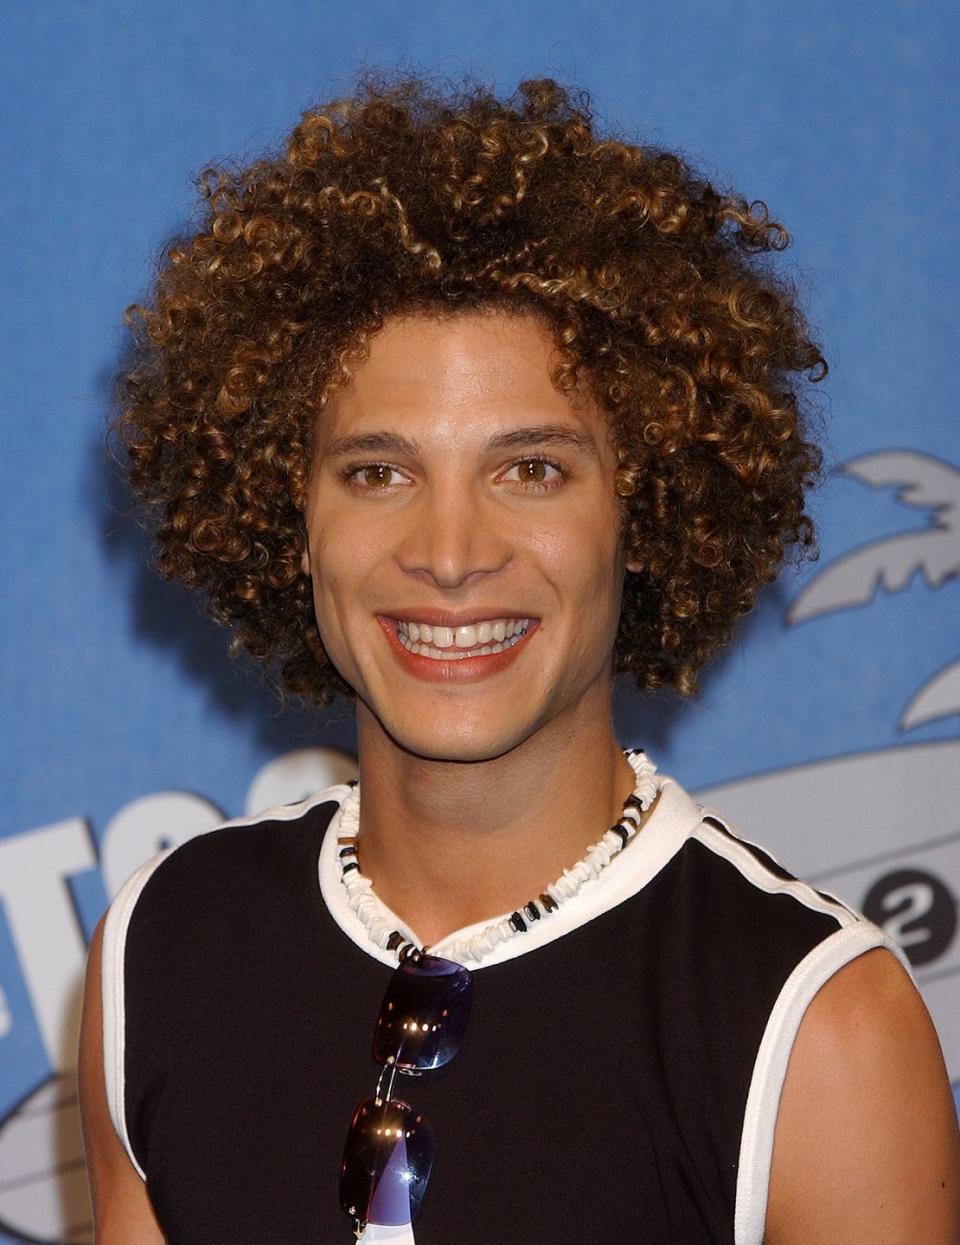 Justin Guarini as Justin in 'From Justin to Kelly'